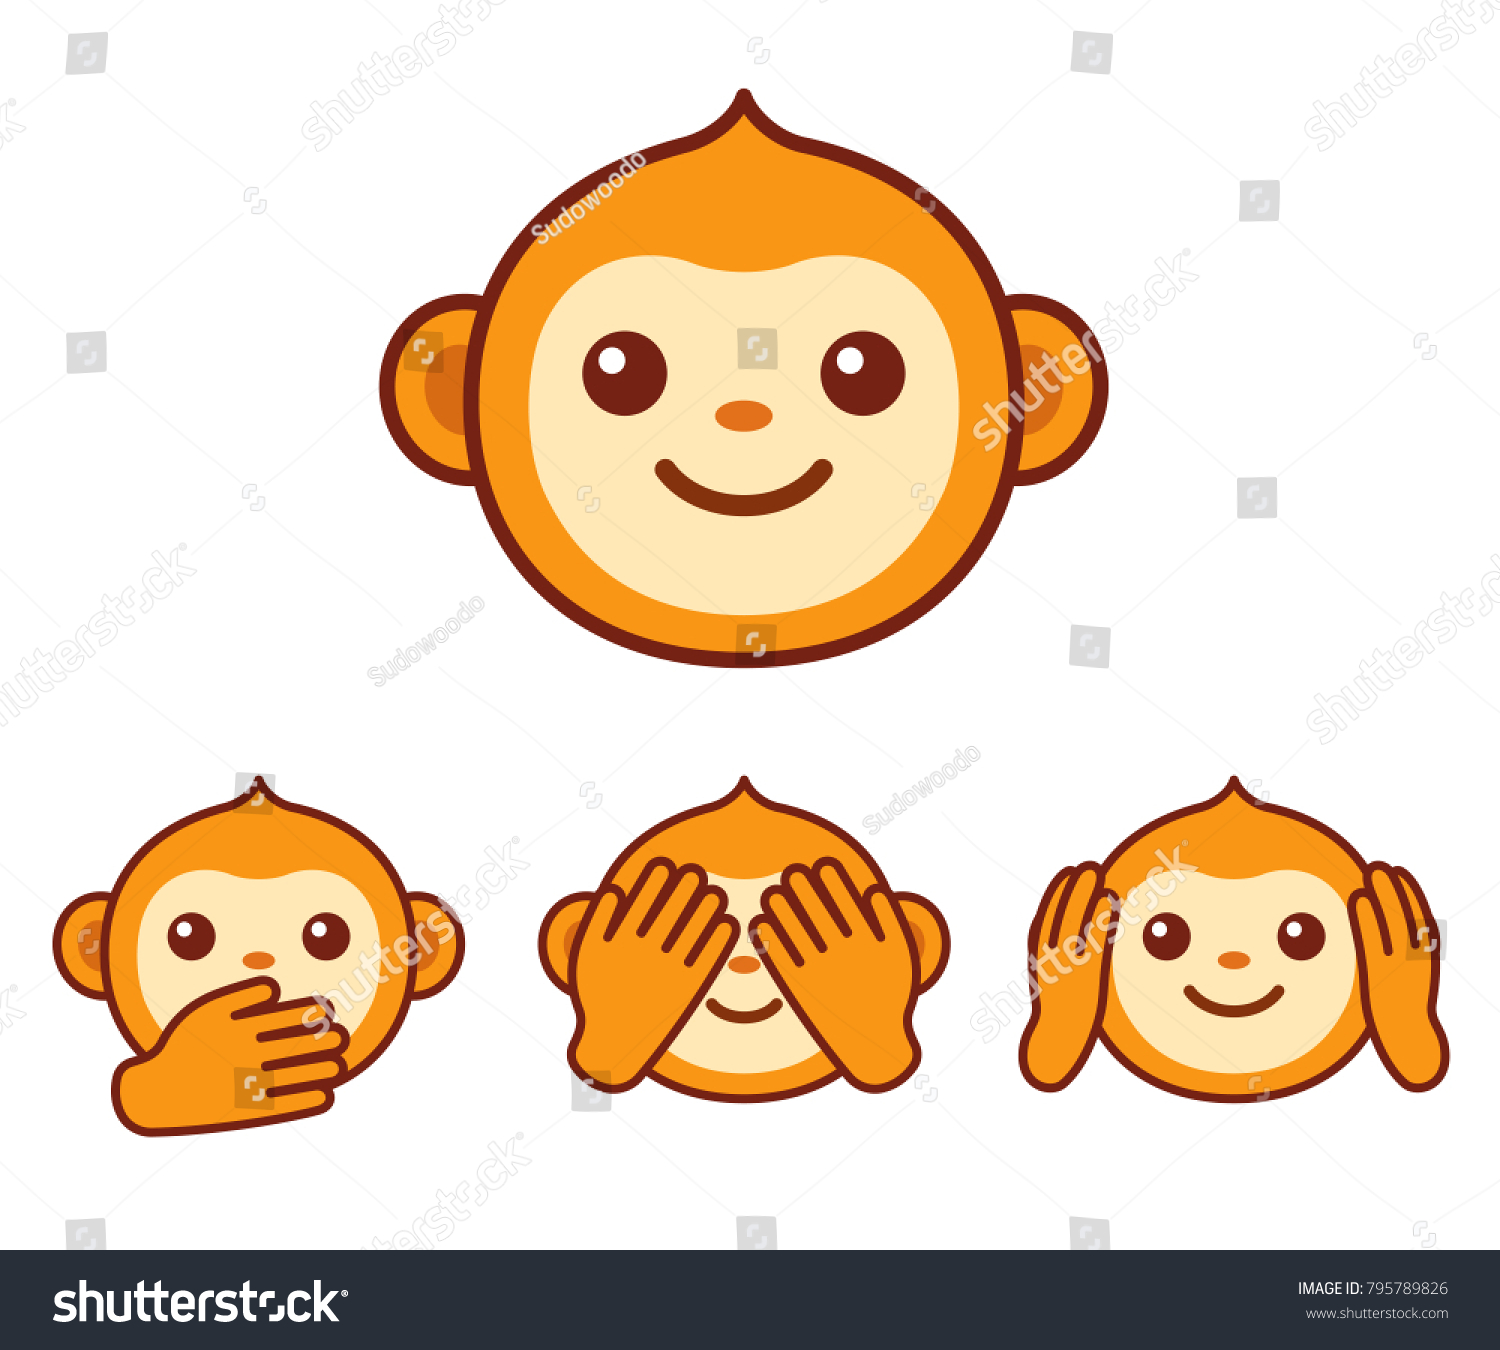 SVG of Cute cartoon monkey face icon. Three wise monkeys with hands covering eyes, ears and mouth: 